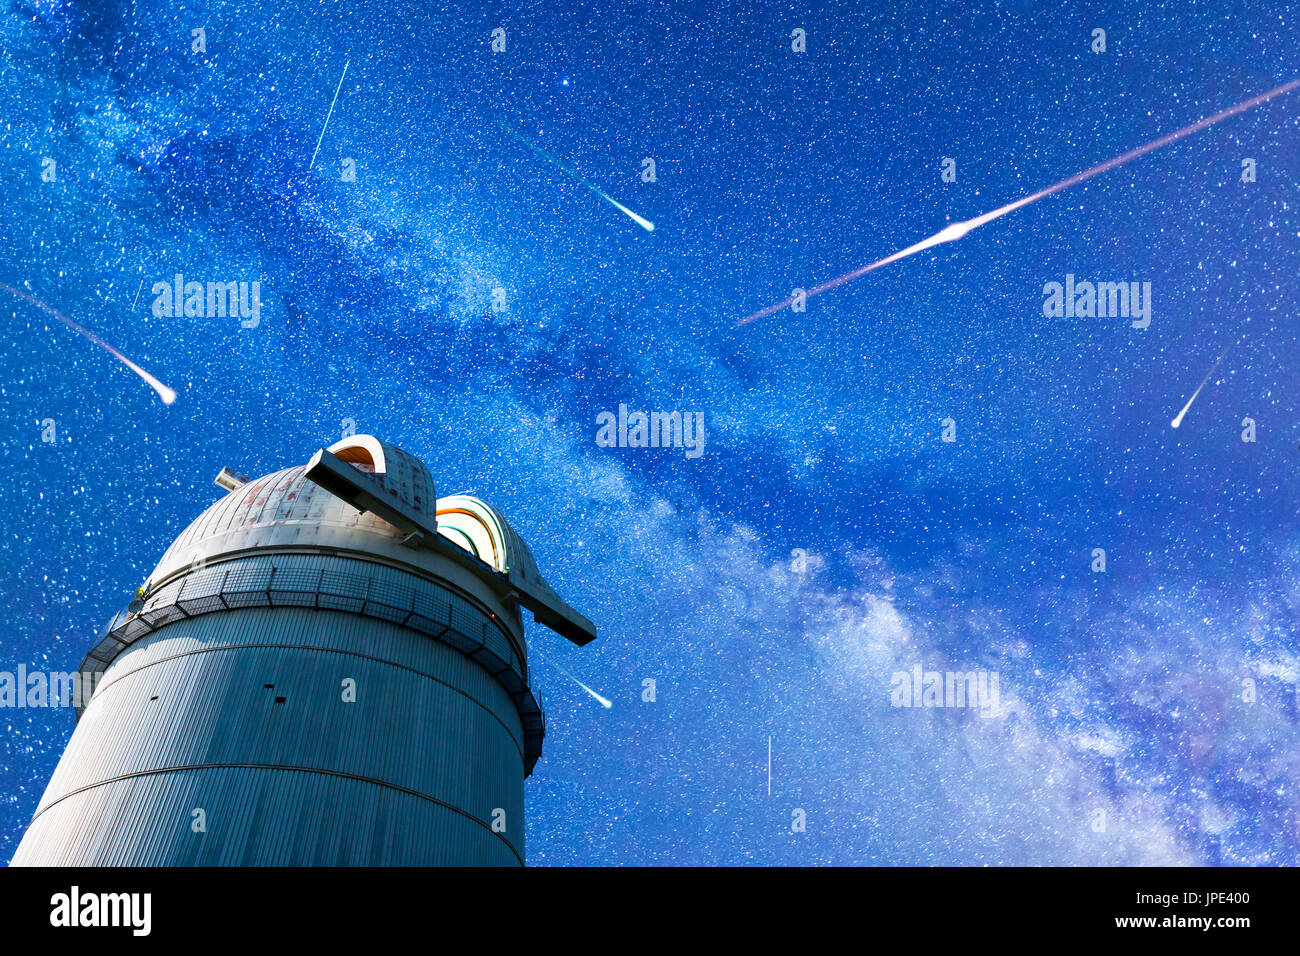 A view of the stars of the Milky Way. Night sky nature summer landscape. Meteor Shower. Falling stars. Comets. Perseid Meteor Shower in 2017. Astronom Stock Photo